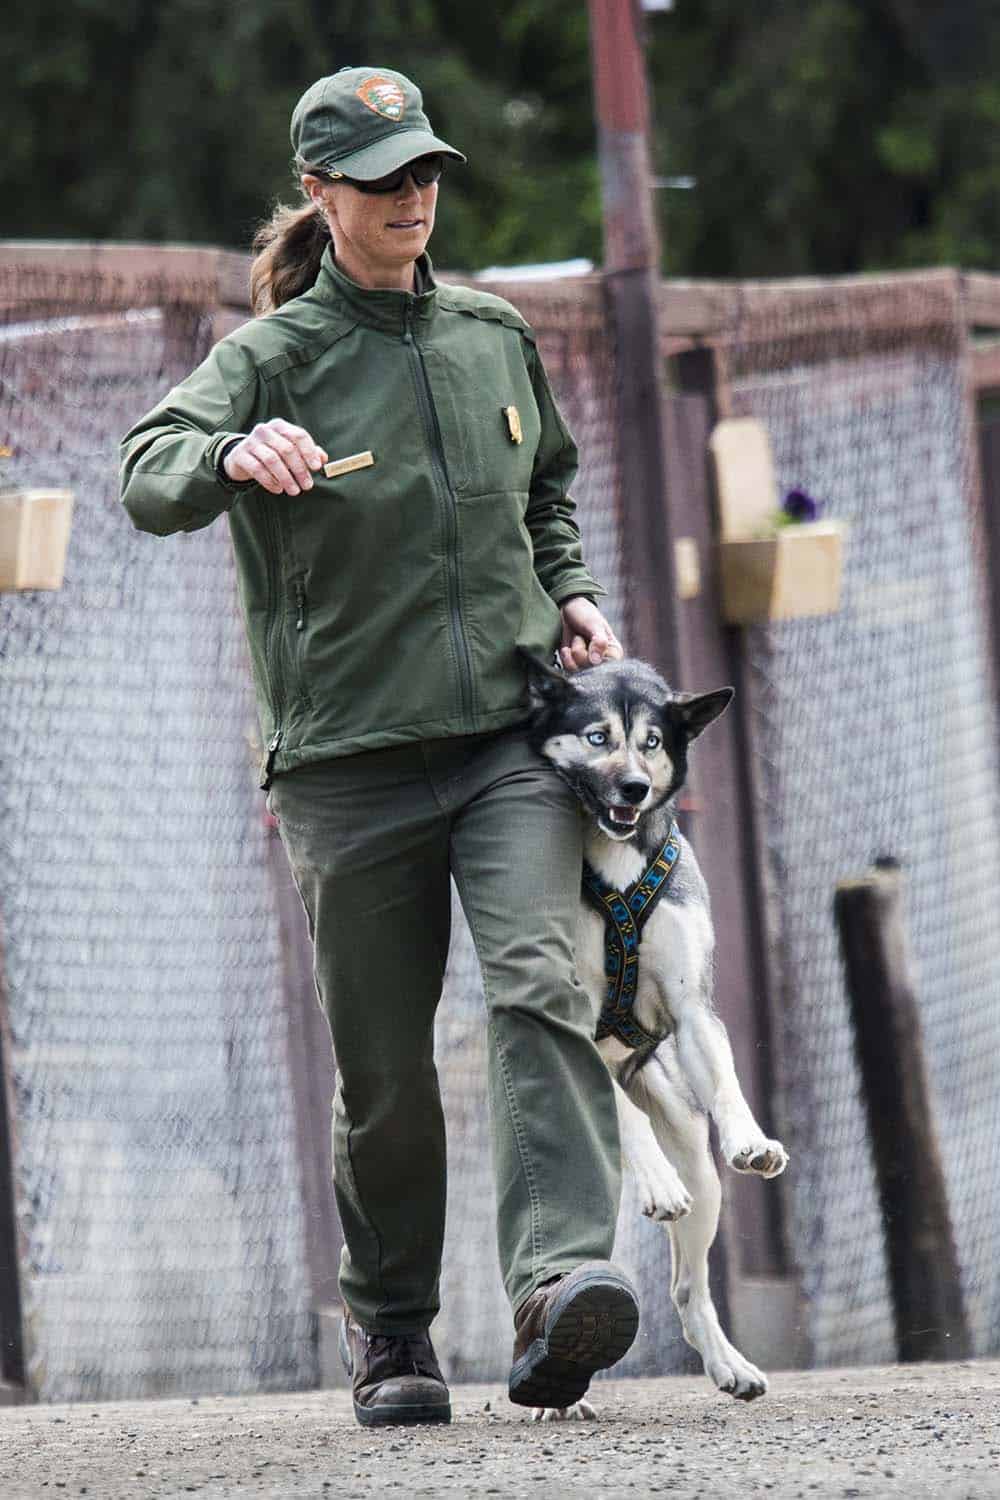 A park ranger holds a dog close by the harness